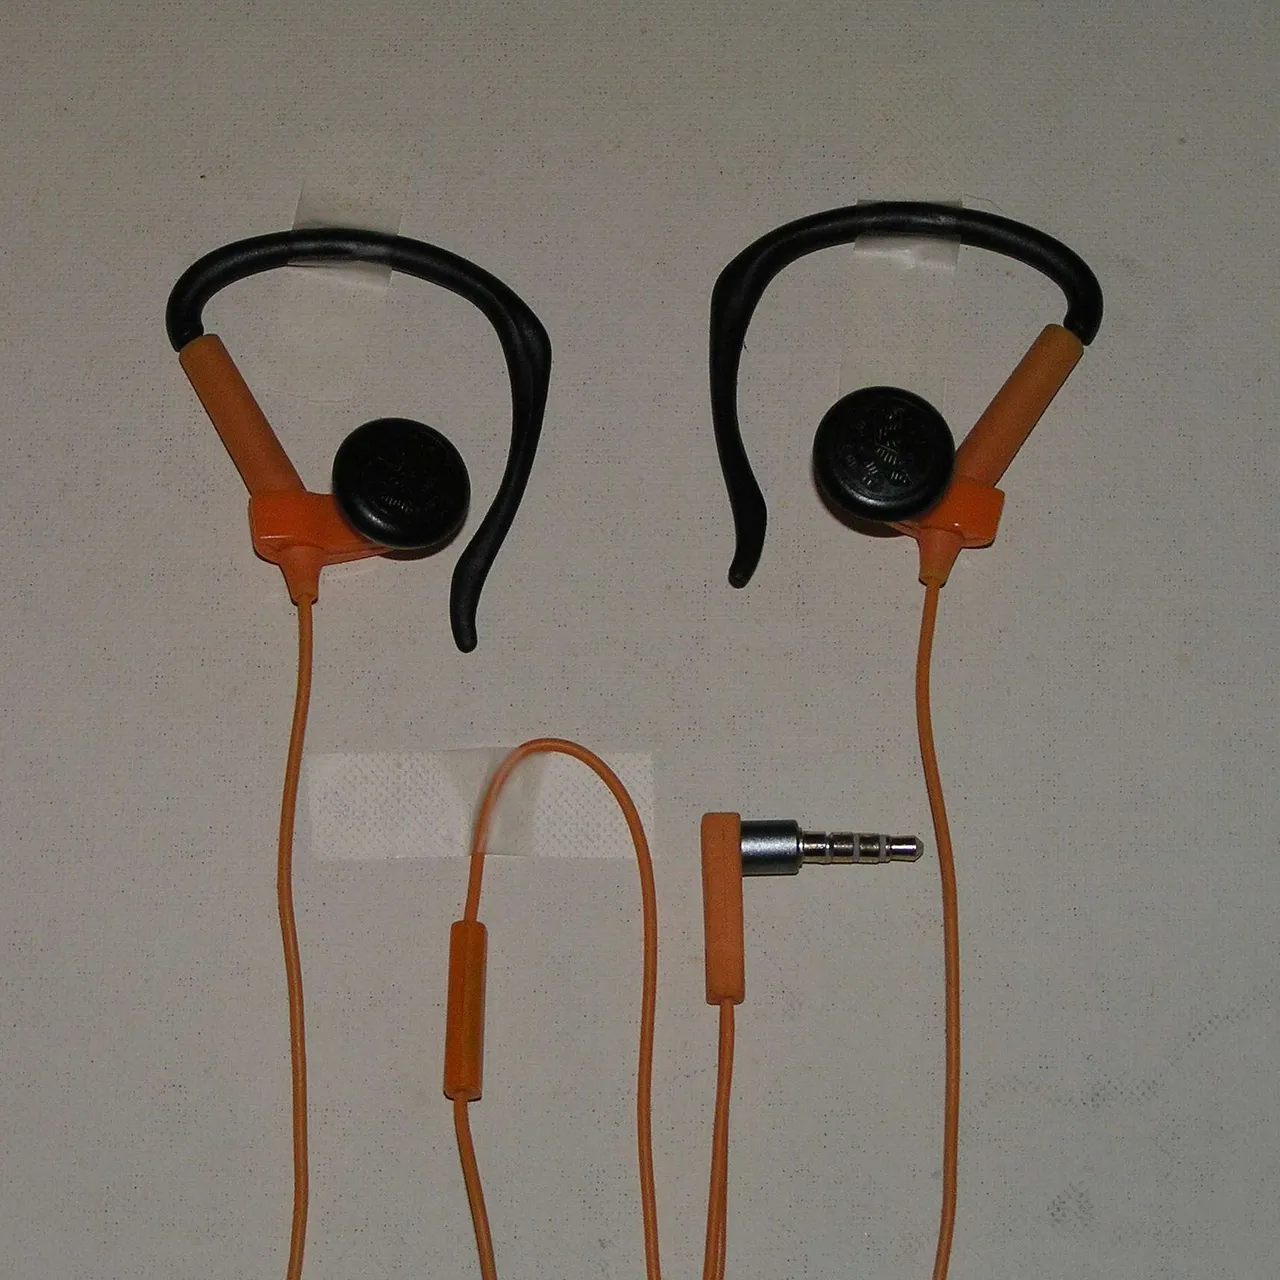 Miscellaneous used earbuds photo 3